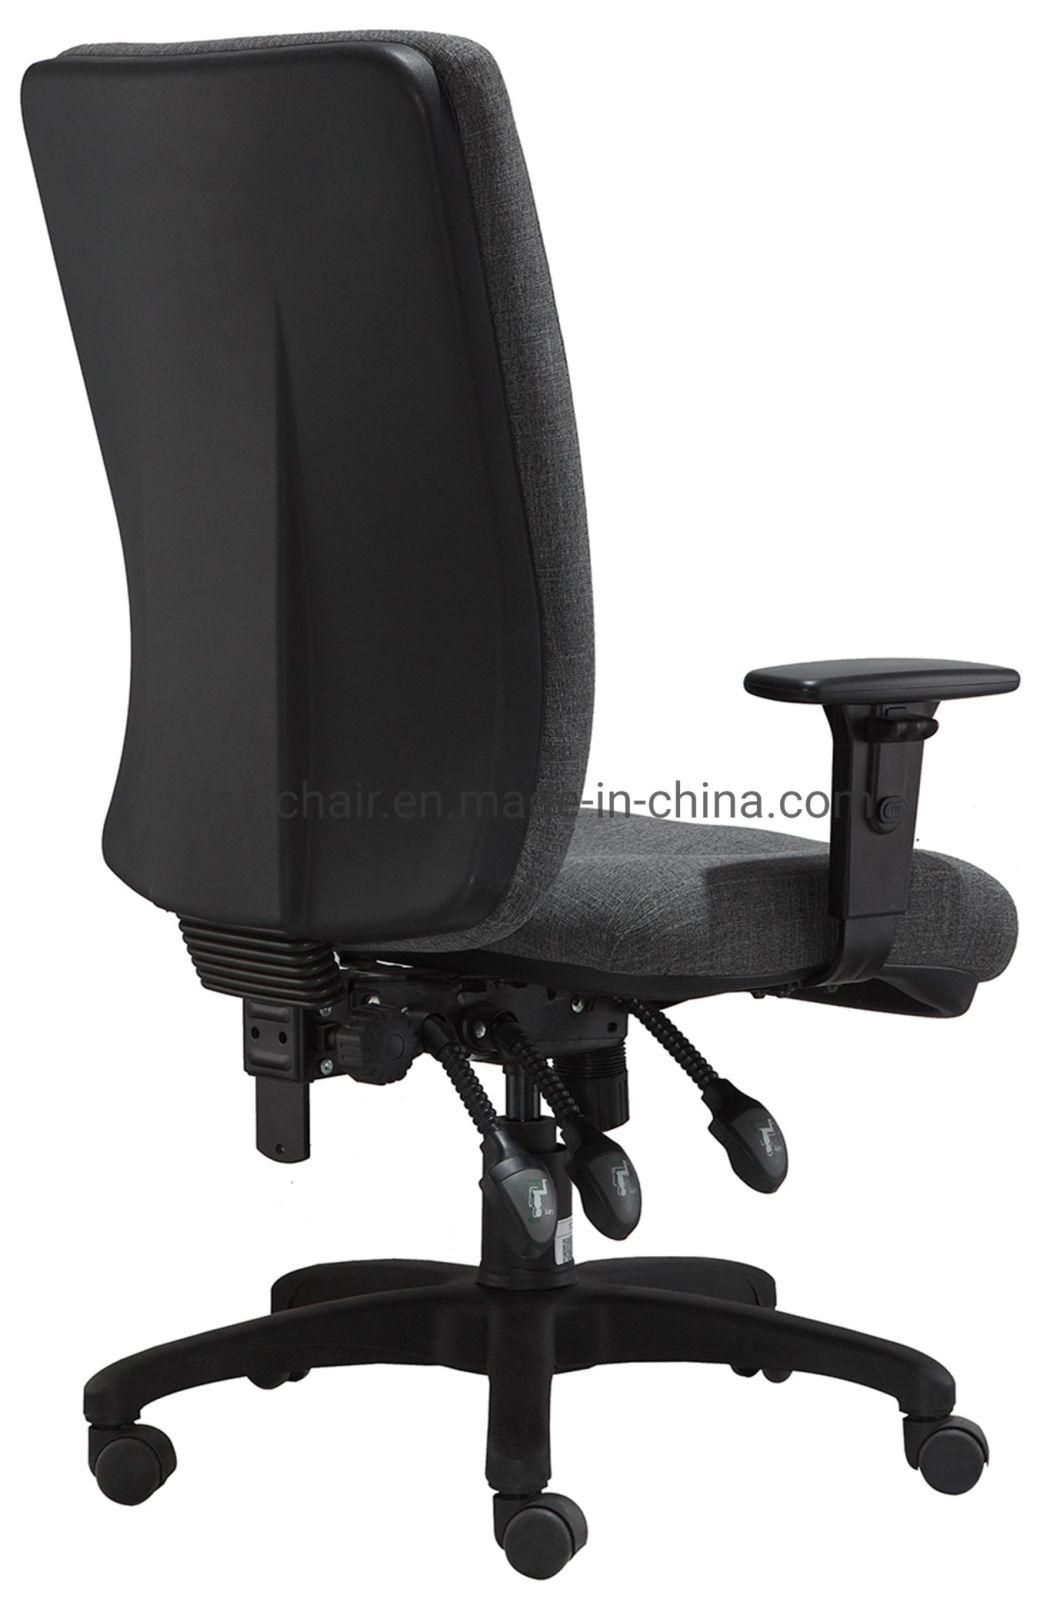 Height Adjustable Armrest Three Lever Heavy Duty Mechanism Nylon Base Fabric Seat&Back High Back Office Chair